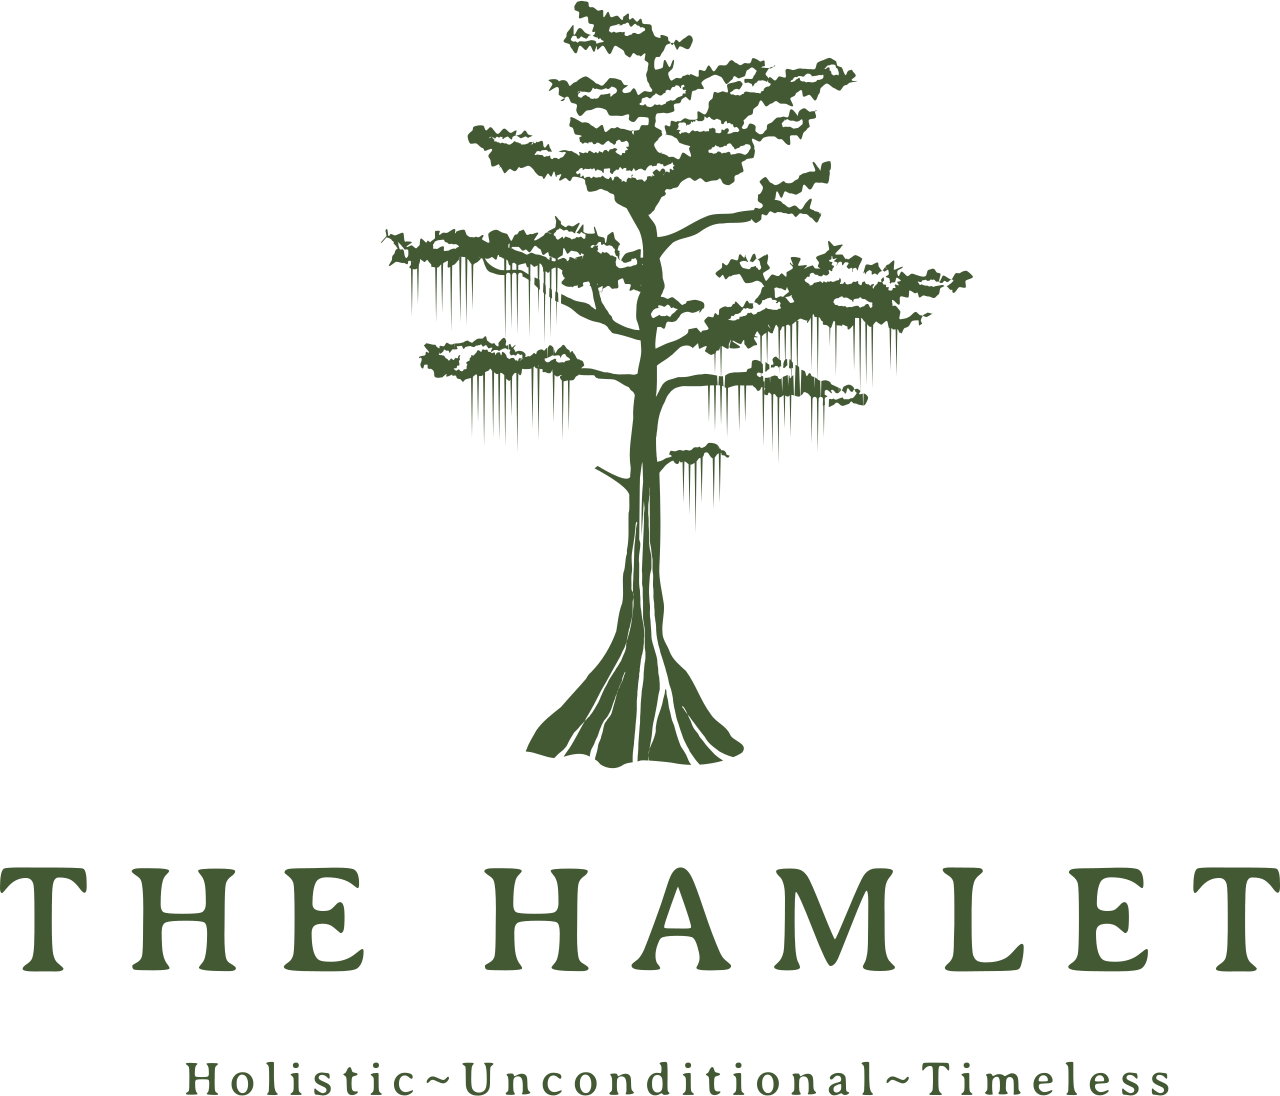 THE HAMLET 's web page